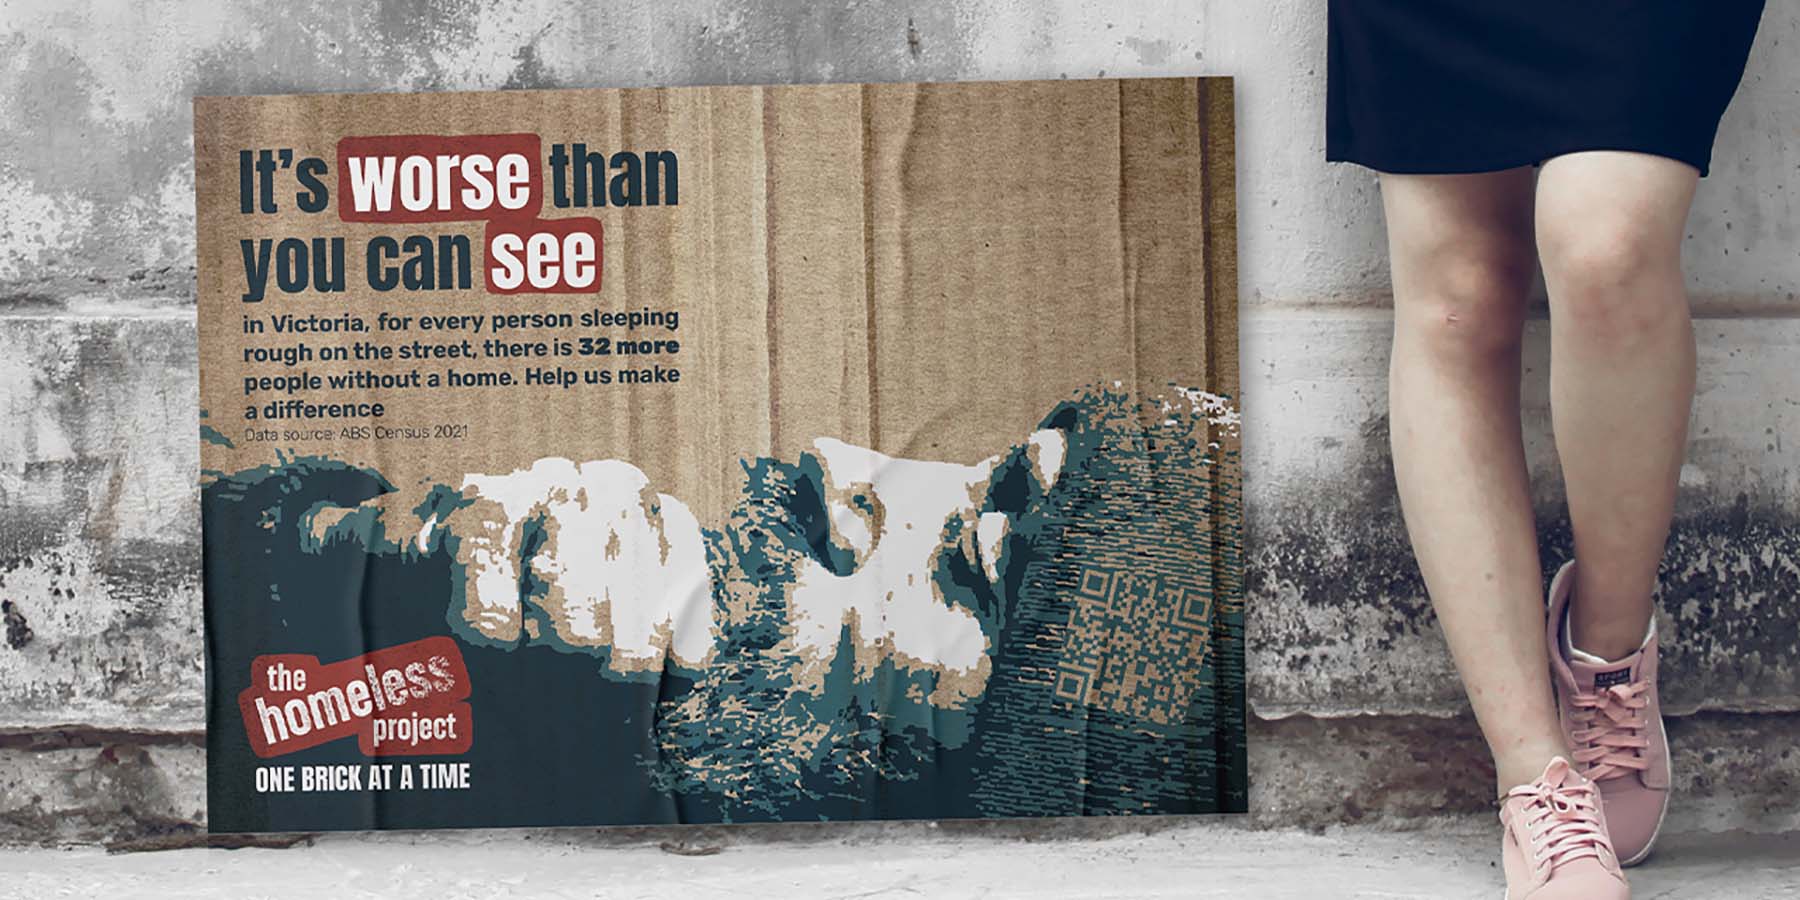 The Homeless Project poster: It's worse than you can see